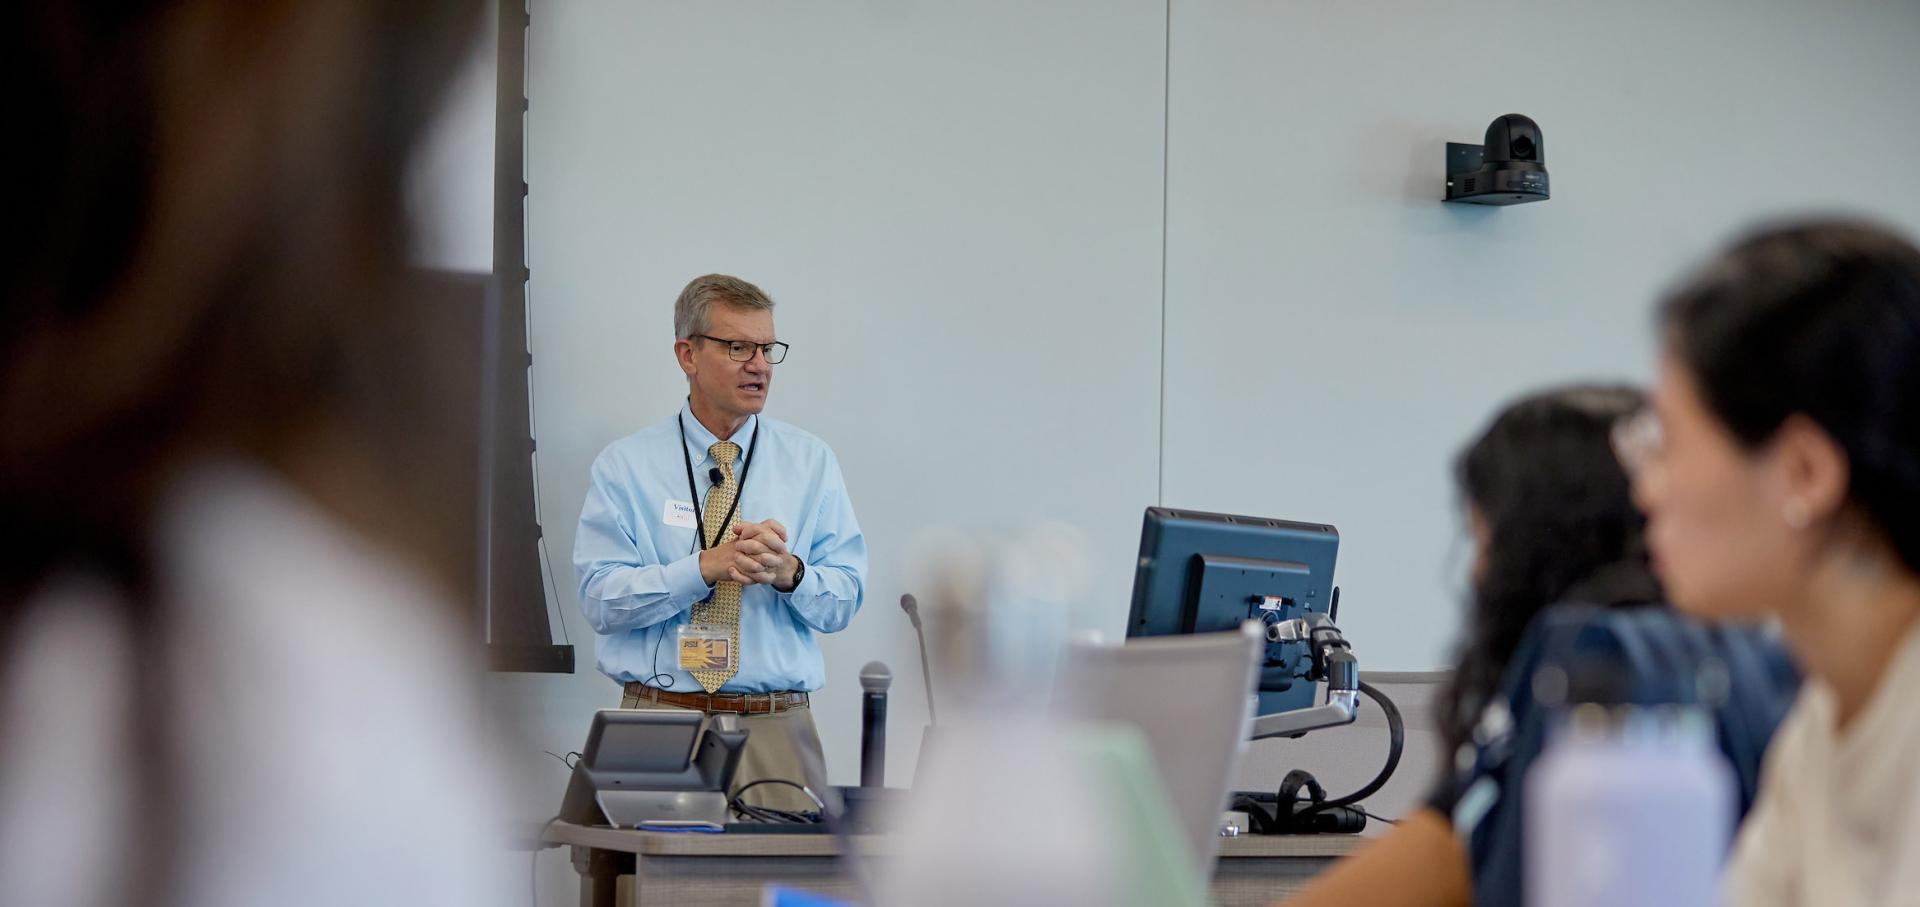 Instructor in white coat teaching students in the classroom